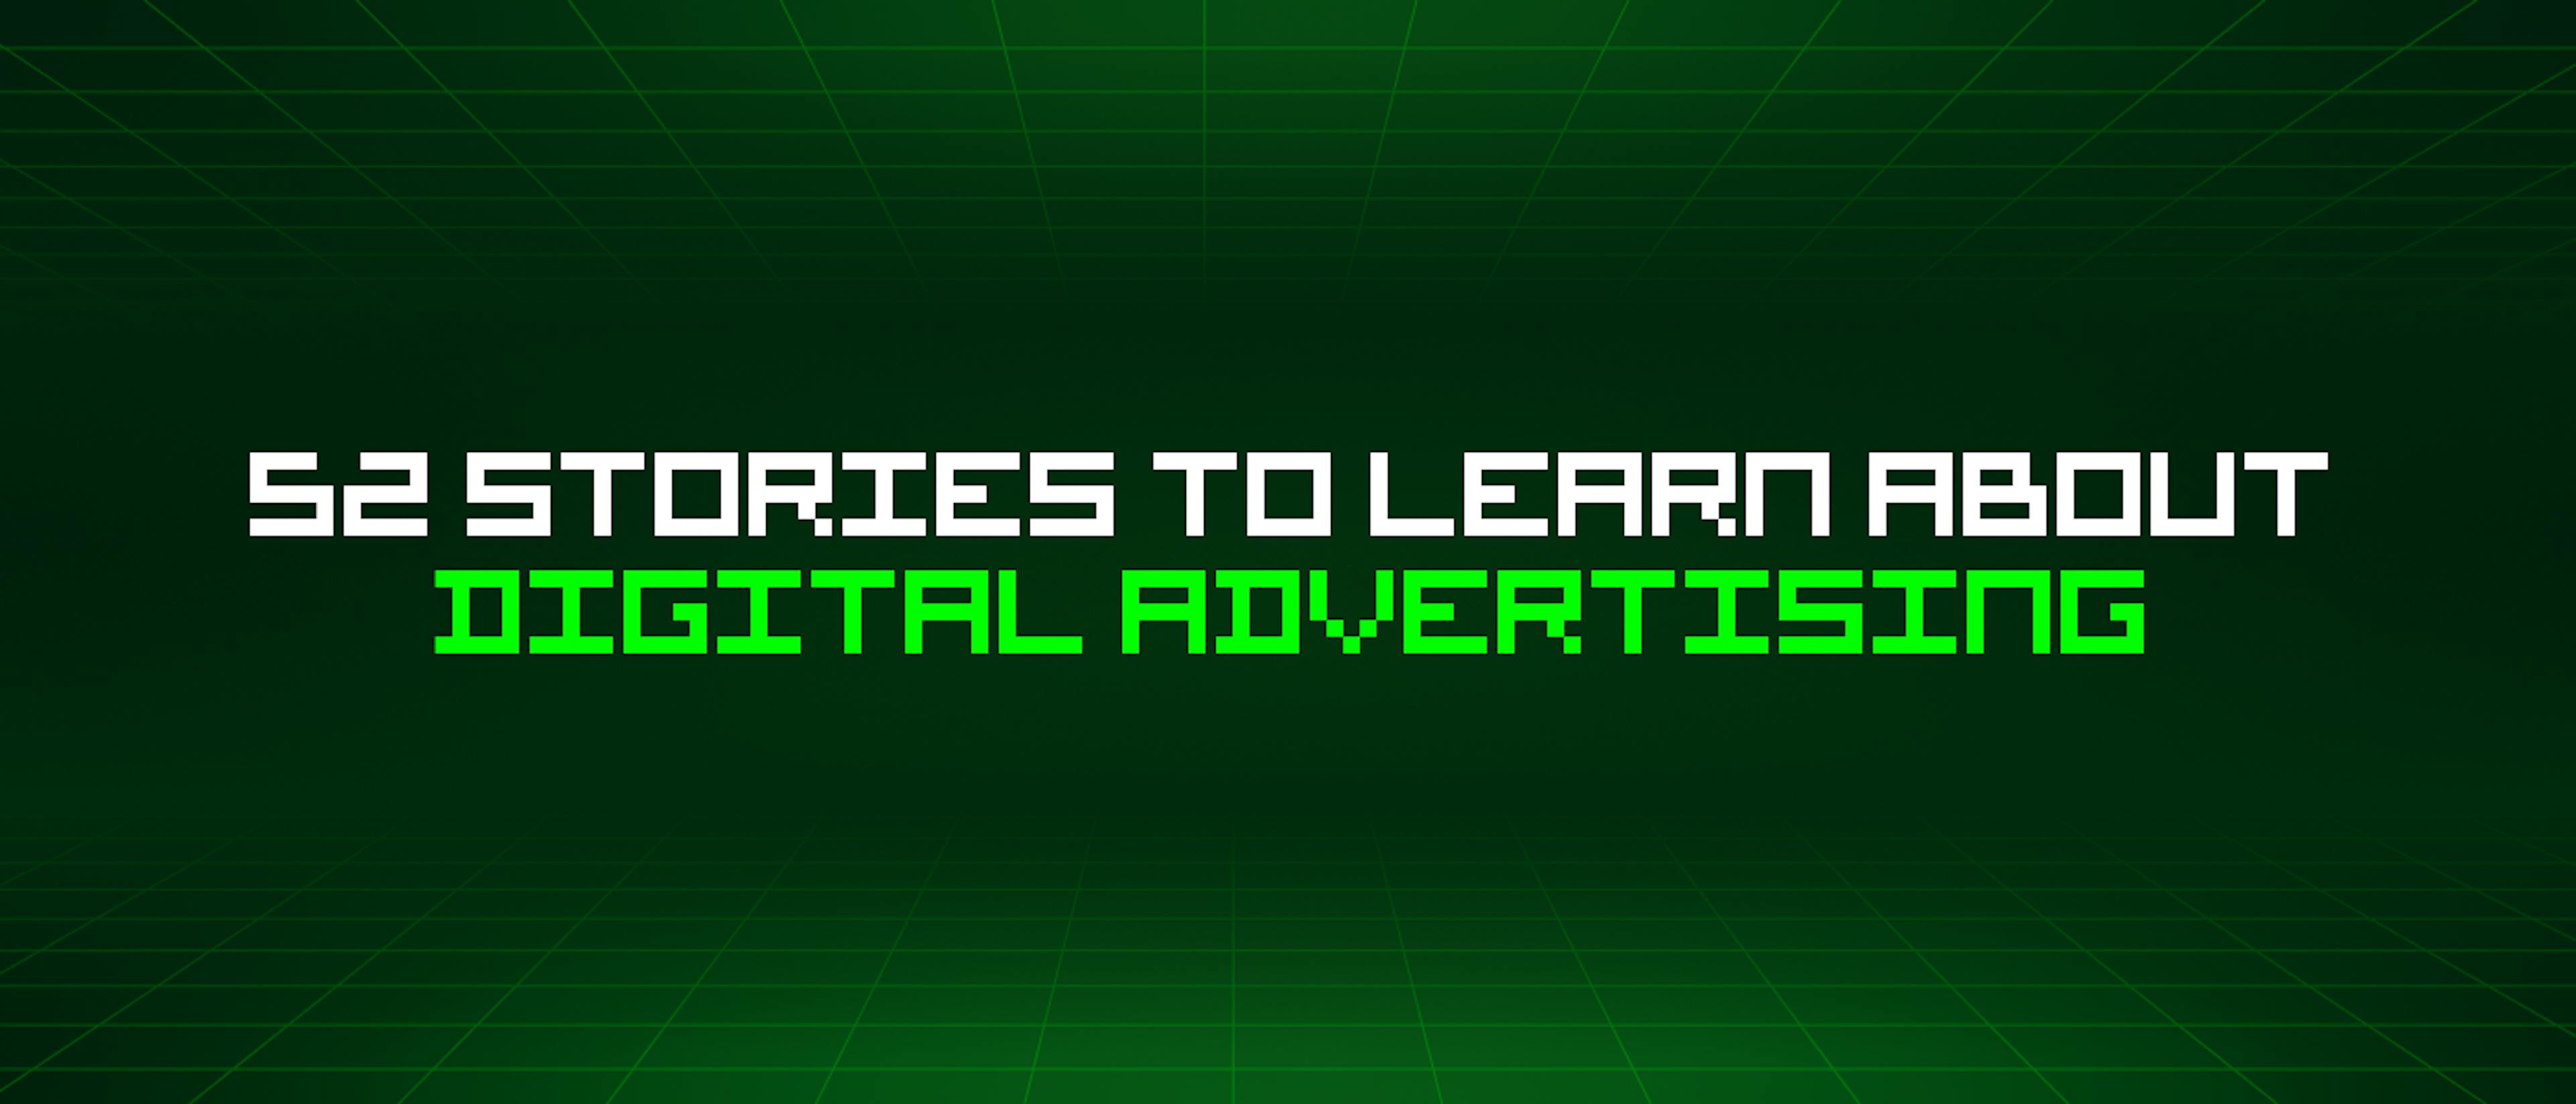 featured image - 52 Stories To Learn About Digital Advertising